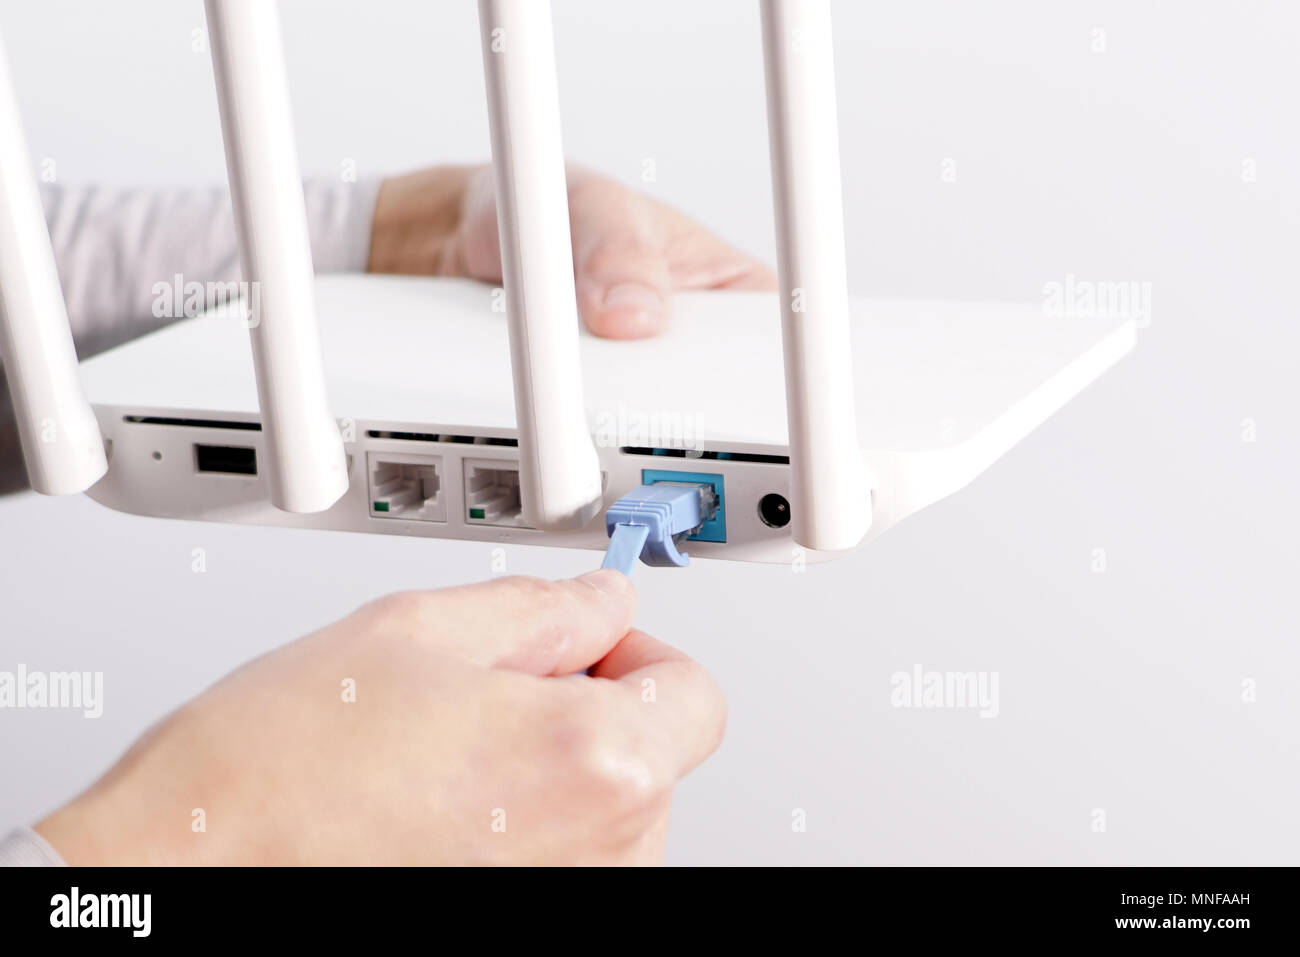 The back view of router showing the lan internet port, and the hand is  pluging in the land cable on a white router Stock Photo - Alamy